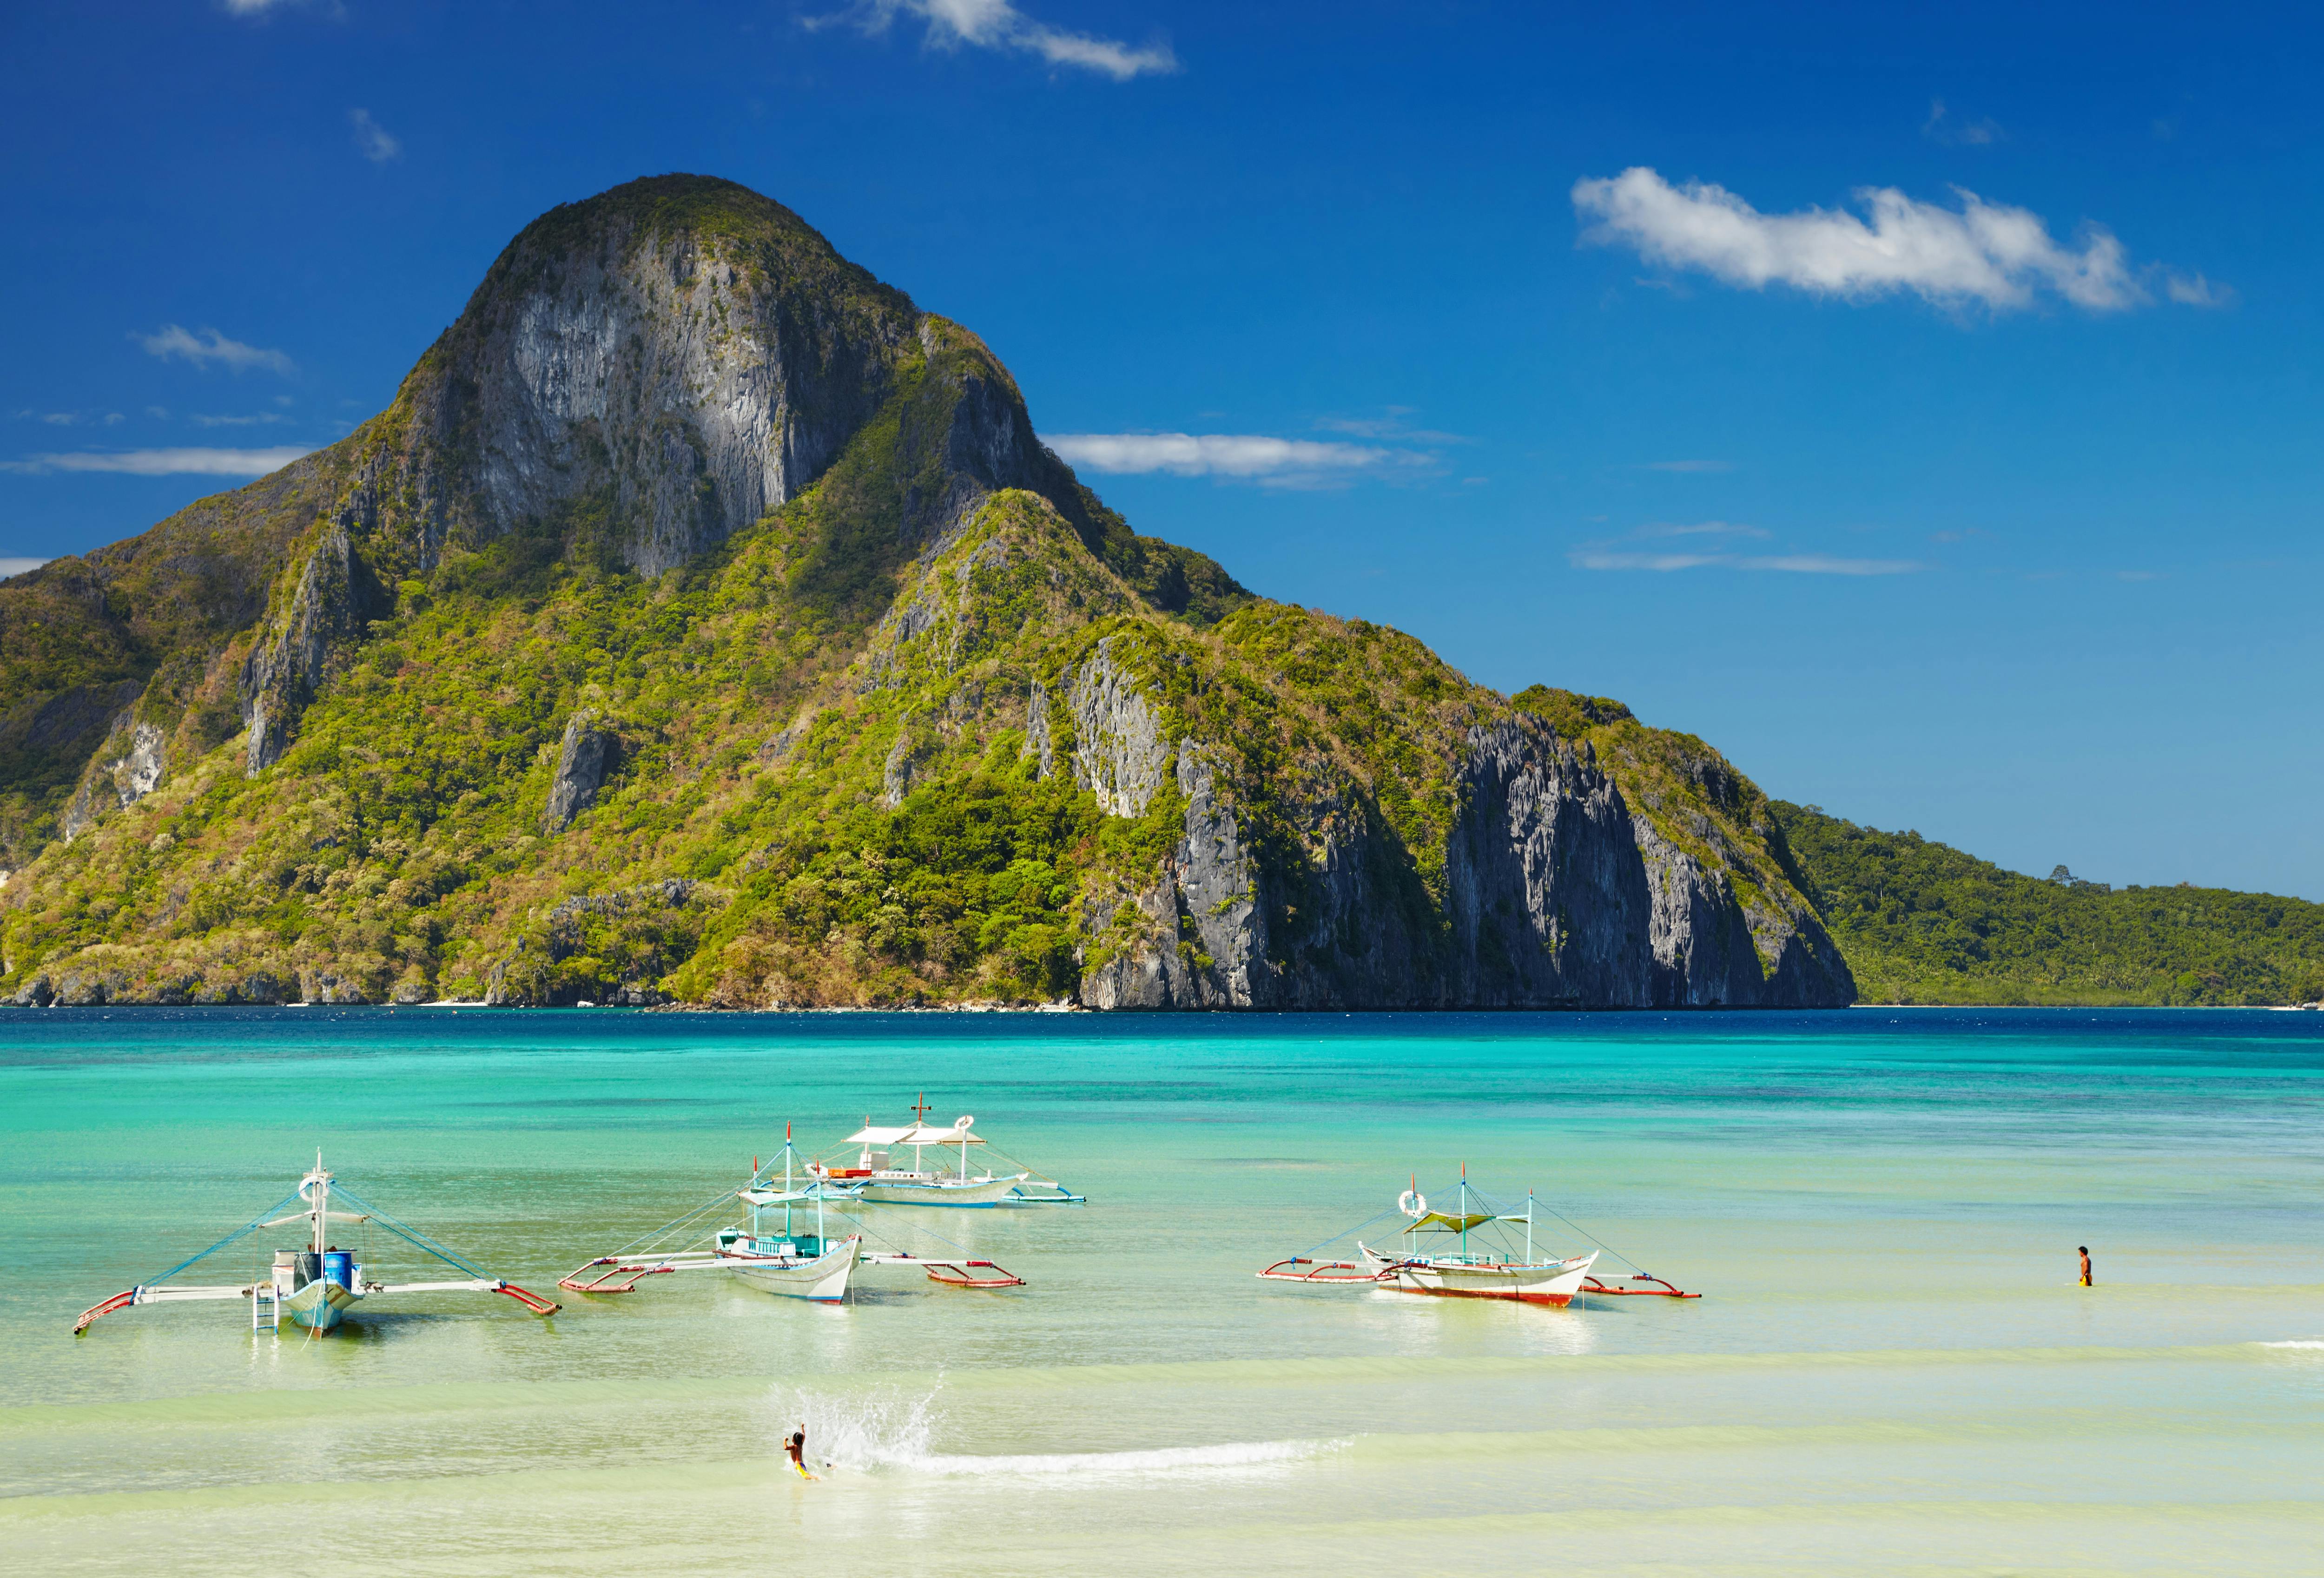 4 Days 3 Nights Coron to El Nido Boat Expedition Tour - day 4